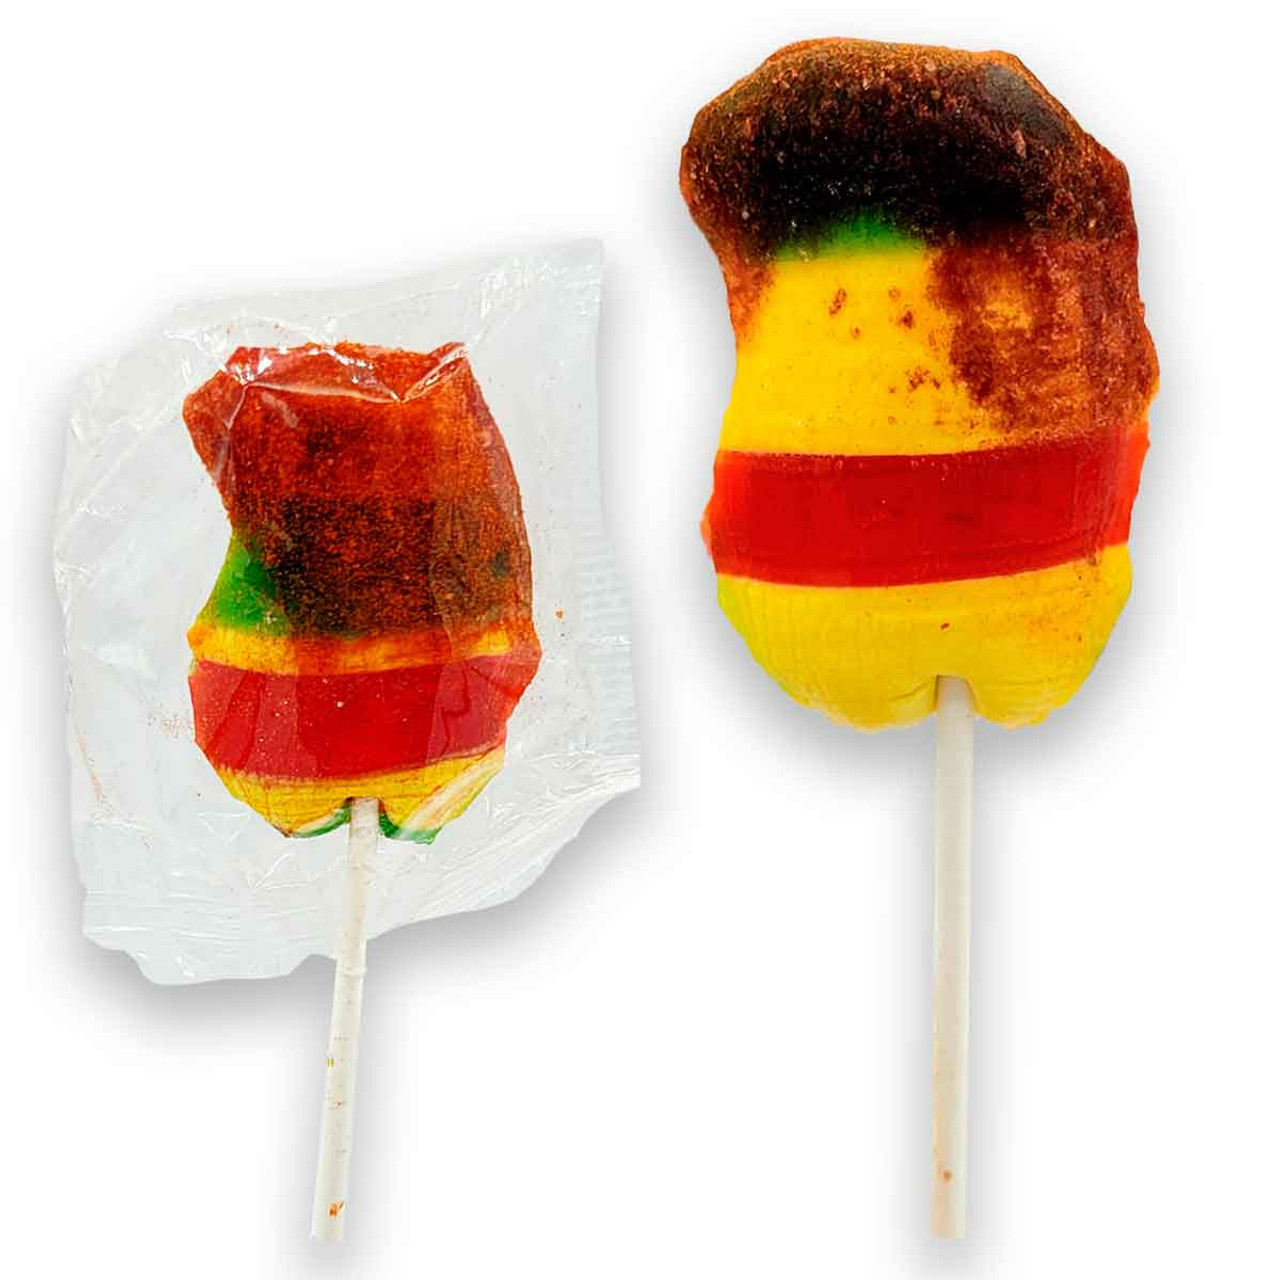 Delicious hard candy lollipop with mango flavors and a tasty touch of spicy chili powder.